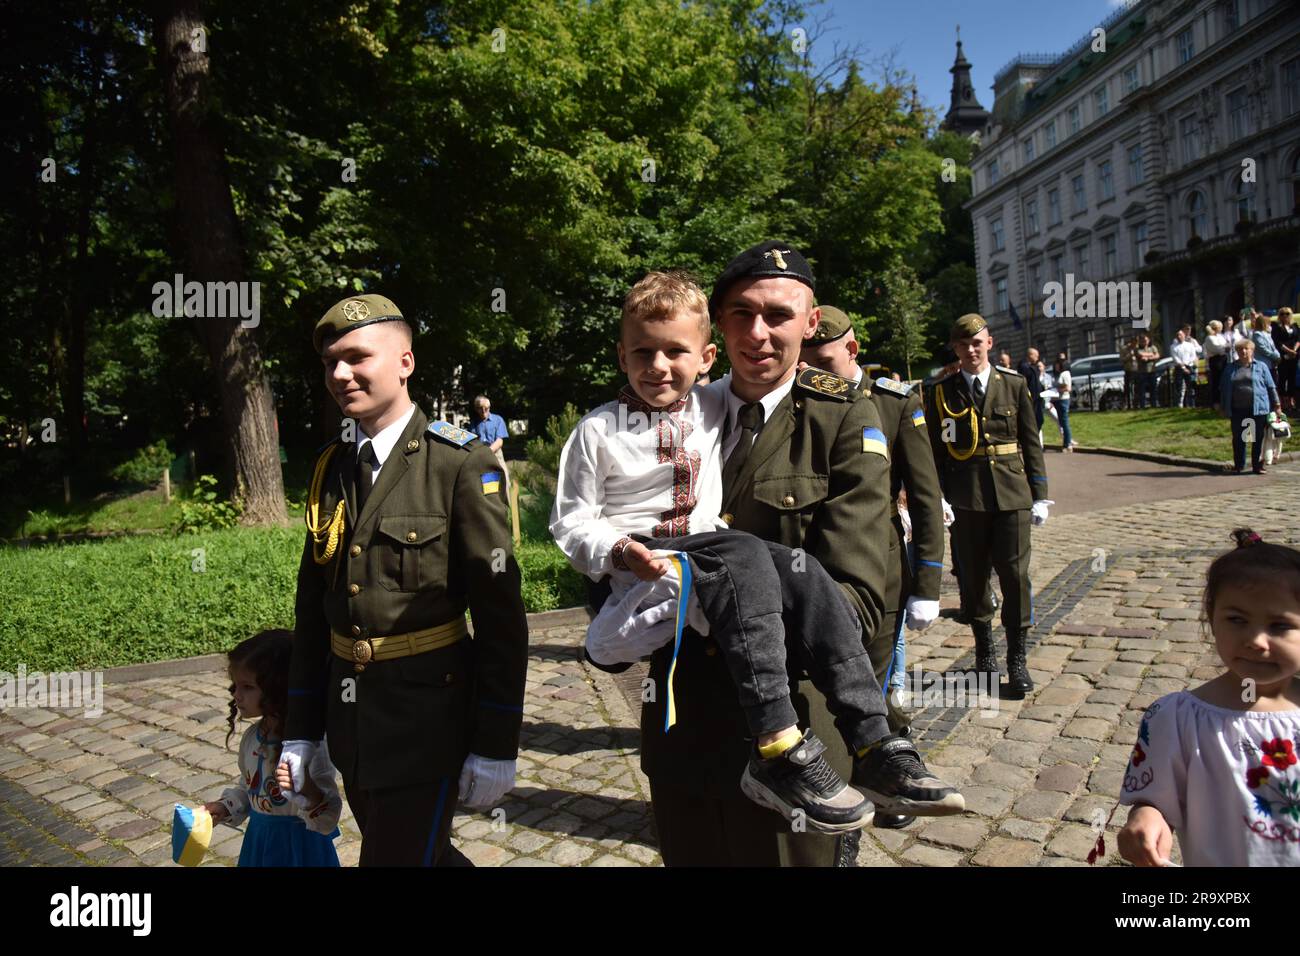 A cadet seen carrying a child in his arms during the celebration of the Constitution Day of Ukraine. Ukraine celebrated the 27th anniversary of the adoption of the country's basic law - the constitution. In the conditions of the Russian-Ukrainian war, official events were very short. In Lviv, the Ukrainian flag was raised, honor guard marched, and a military band performed. (Photo by Pavlo Palamarchuk / SOPA mages/Sipa USA) Stock Photo